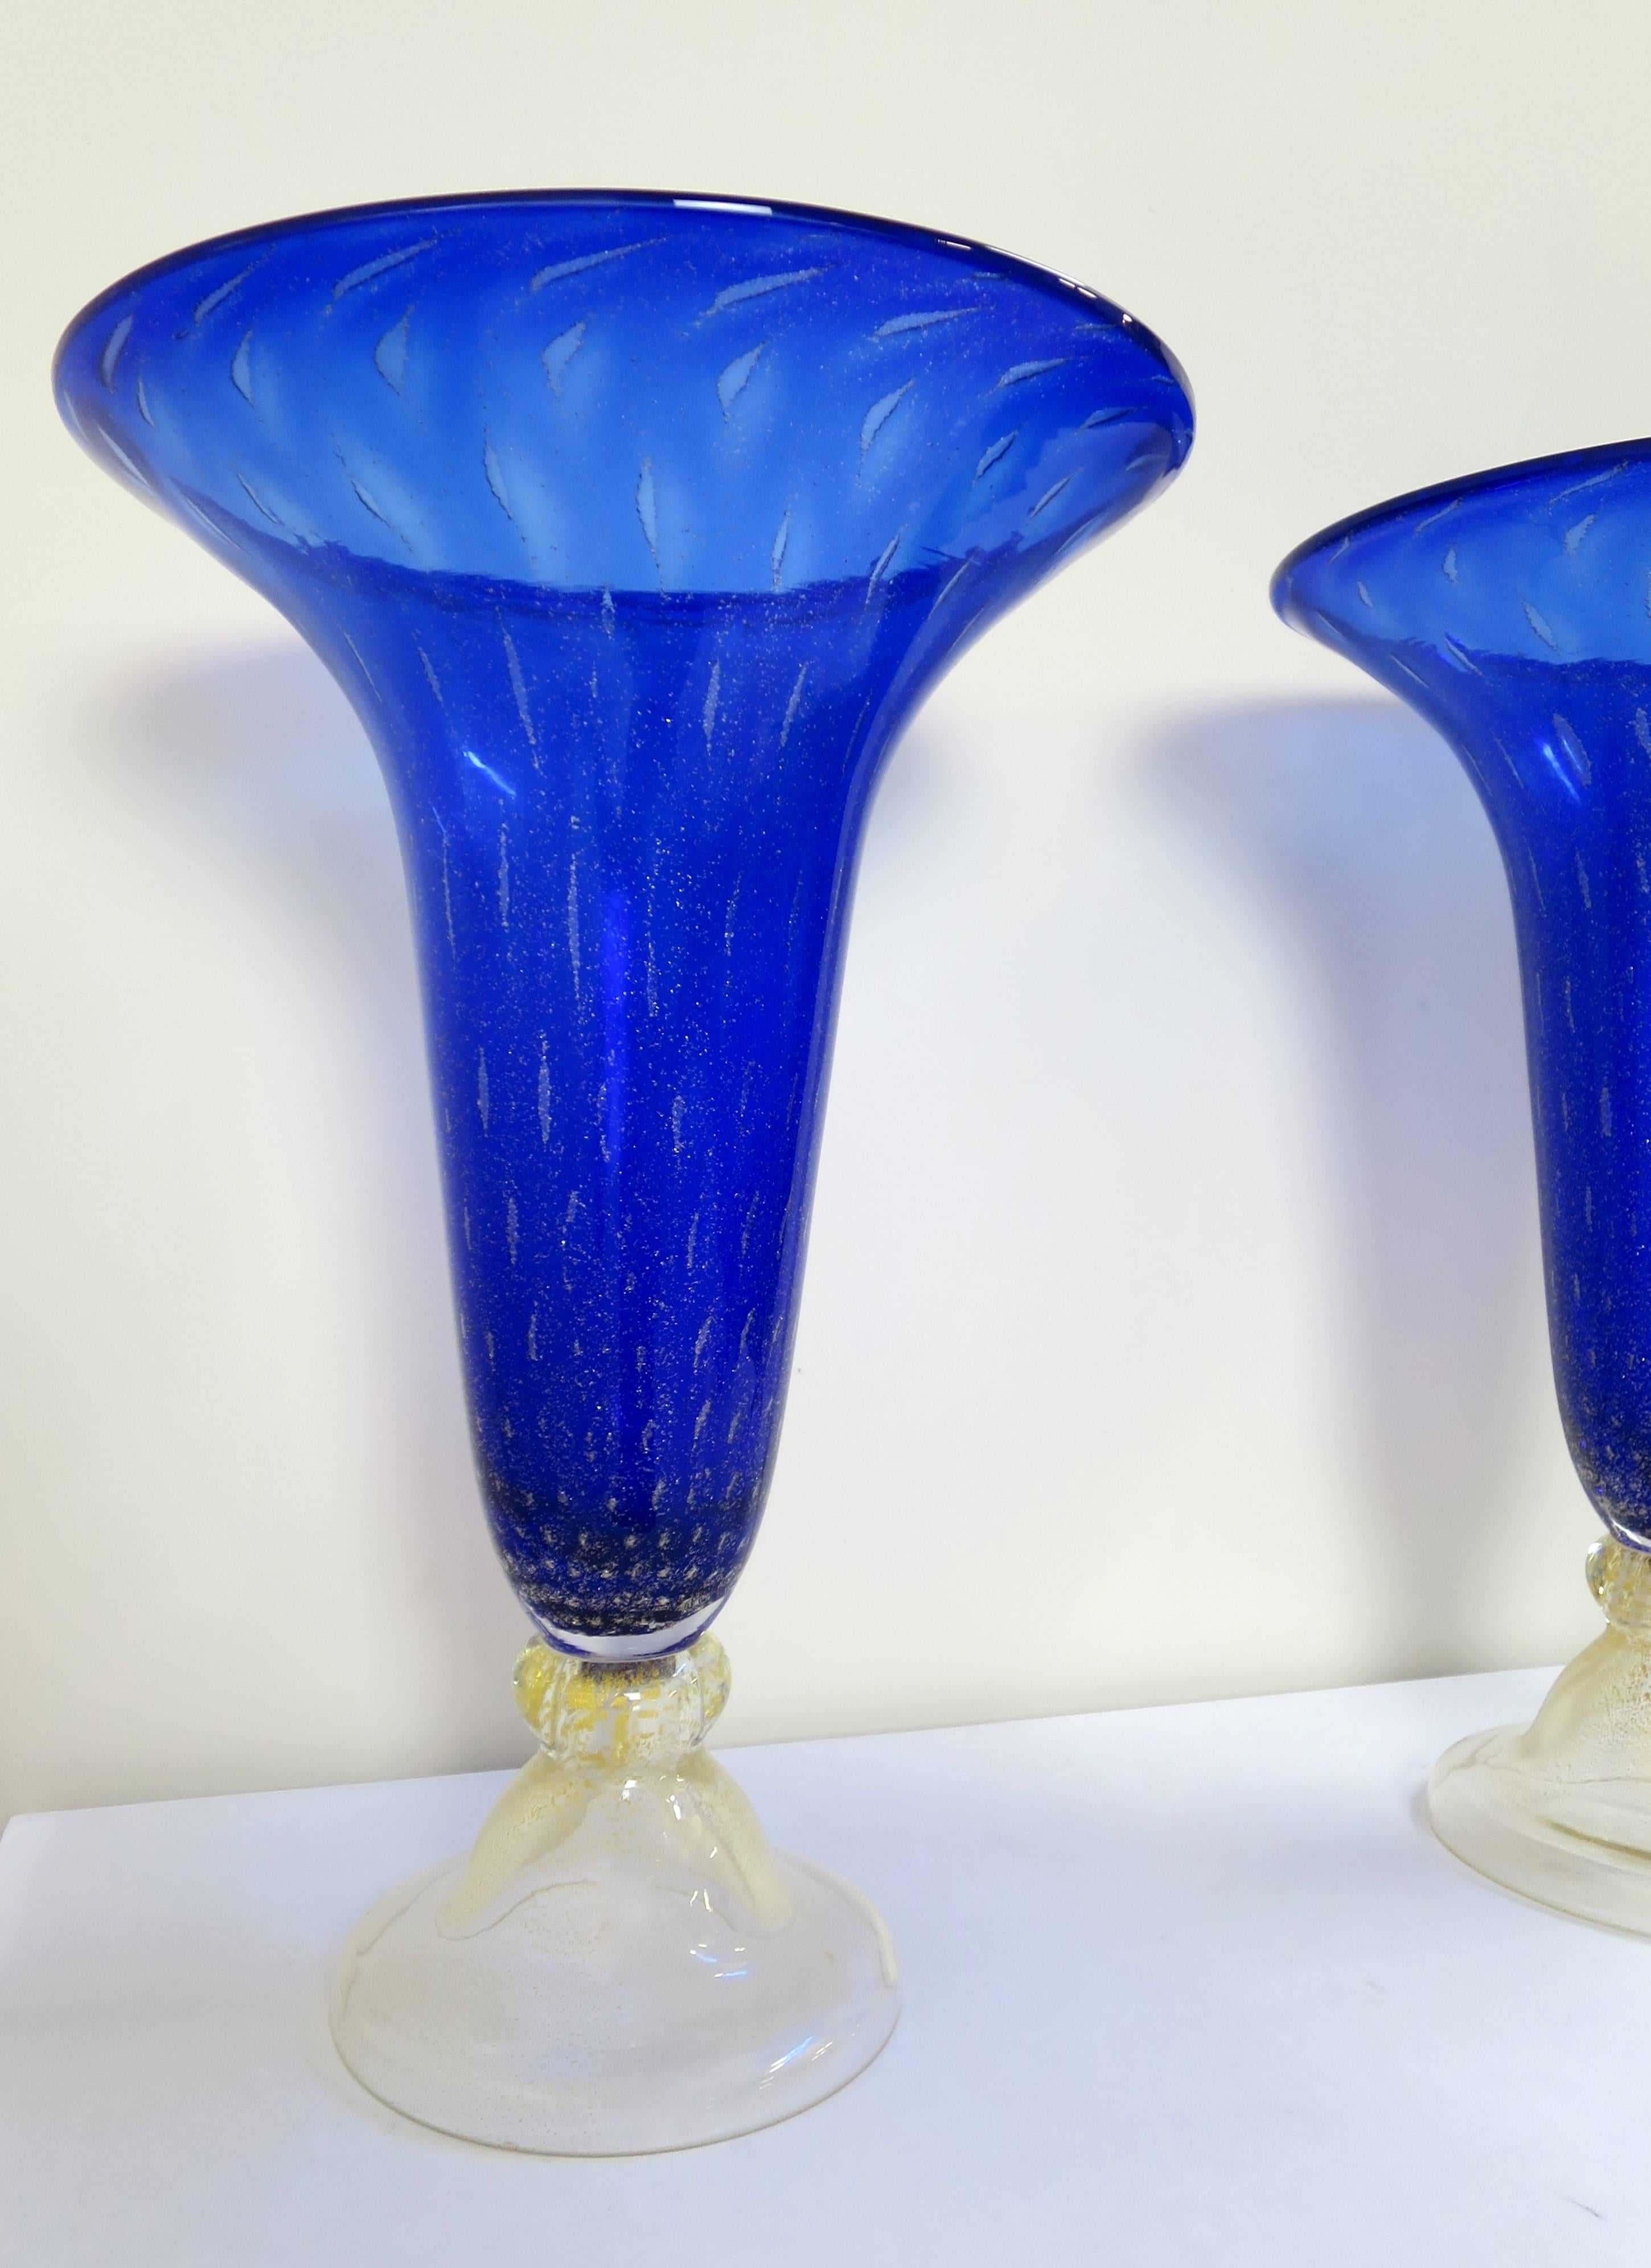 Italian Exquisite Pair of Large Royal Blue Murano Glass Vases For Sale